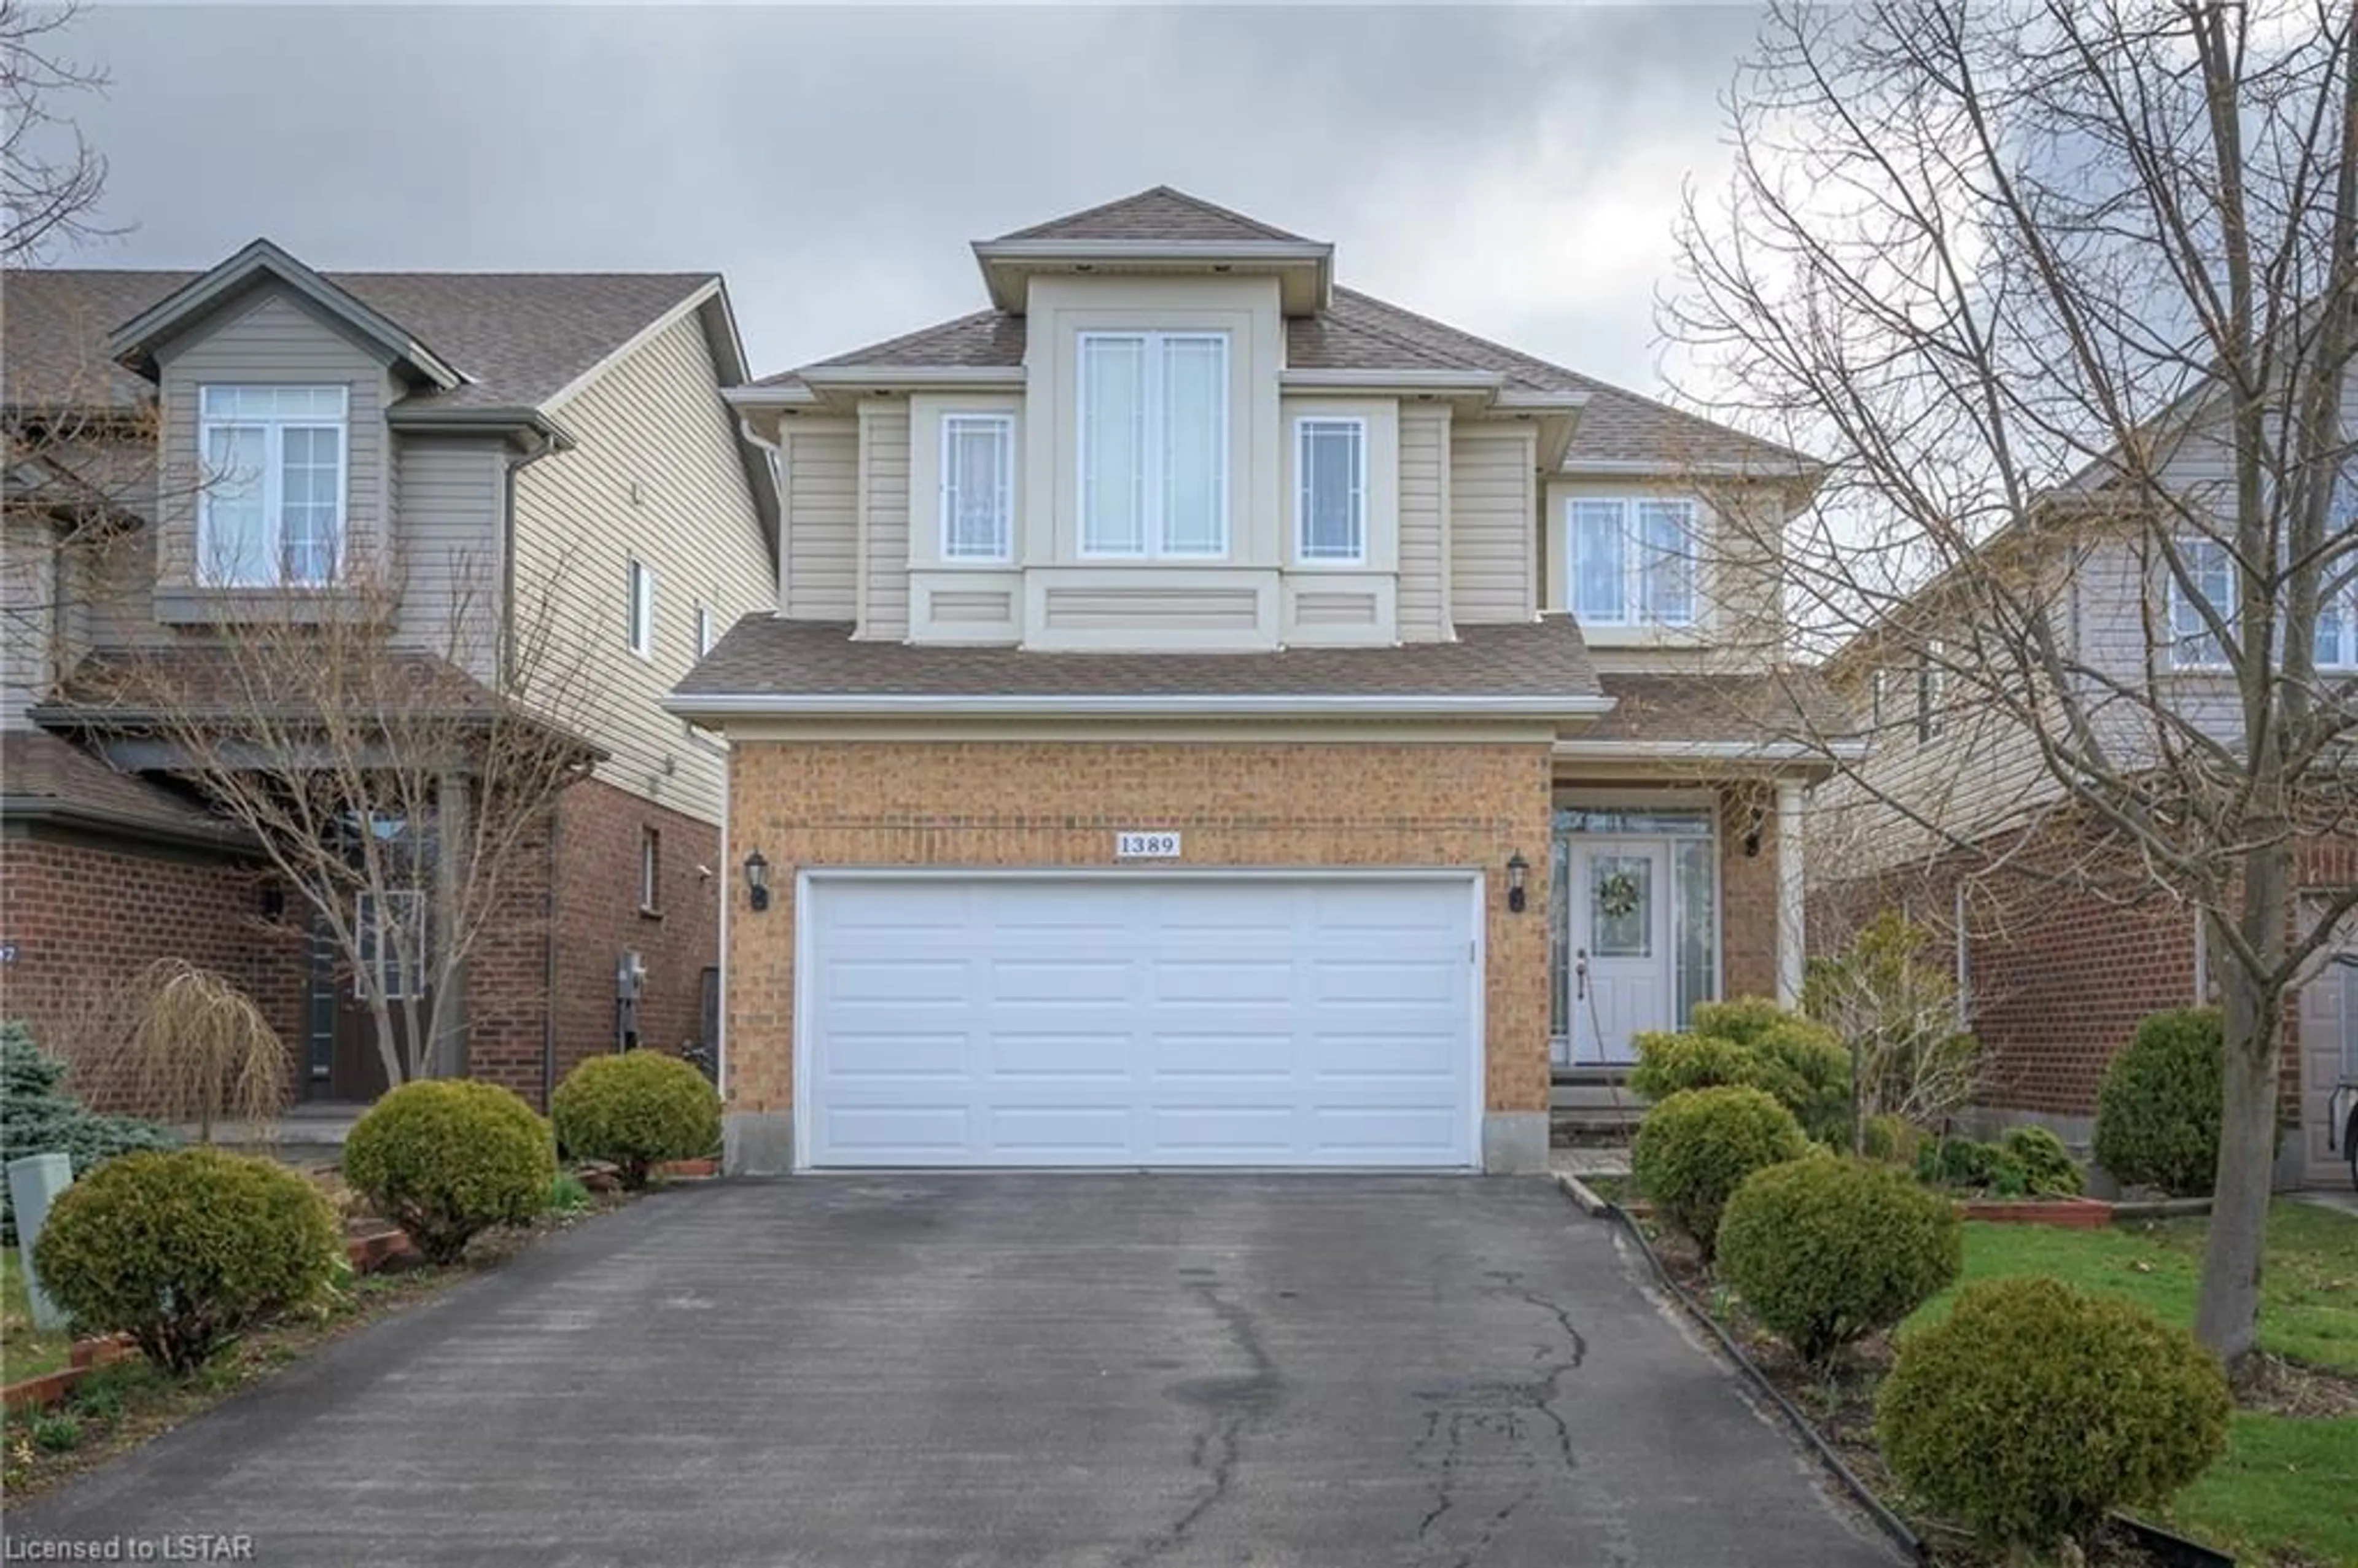 Frontside or backside of a home for 1389 Pleasantview Dr, London Ontario N5X 4P8